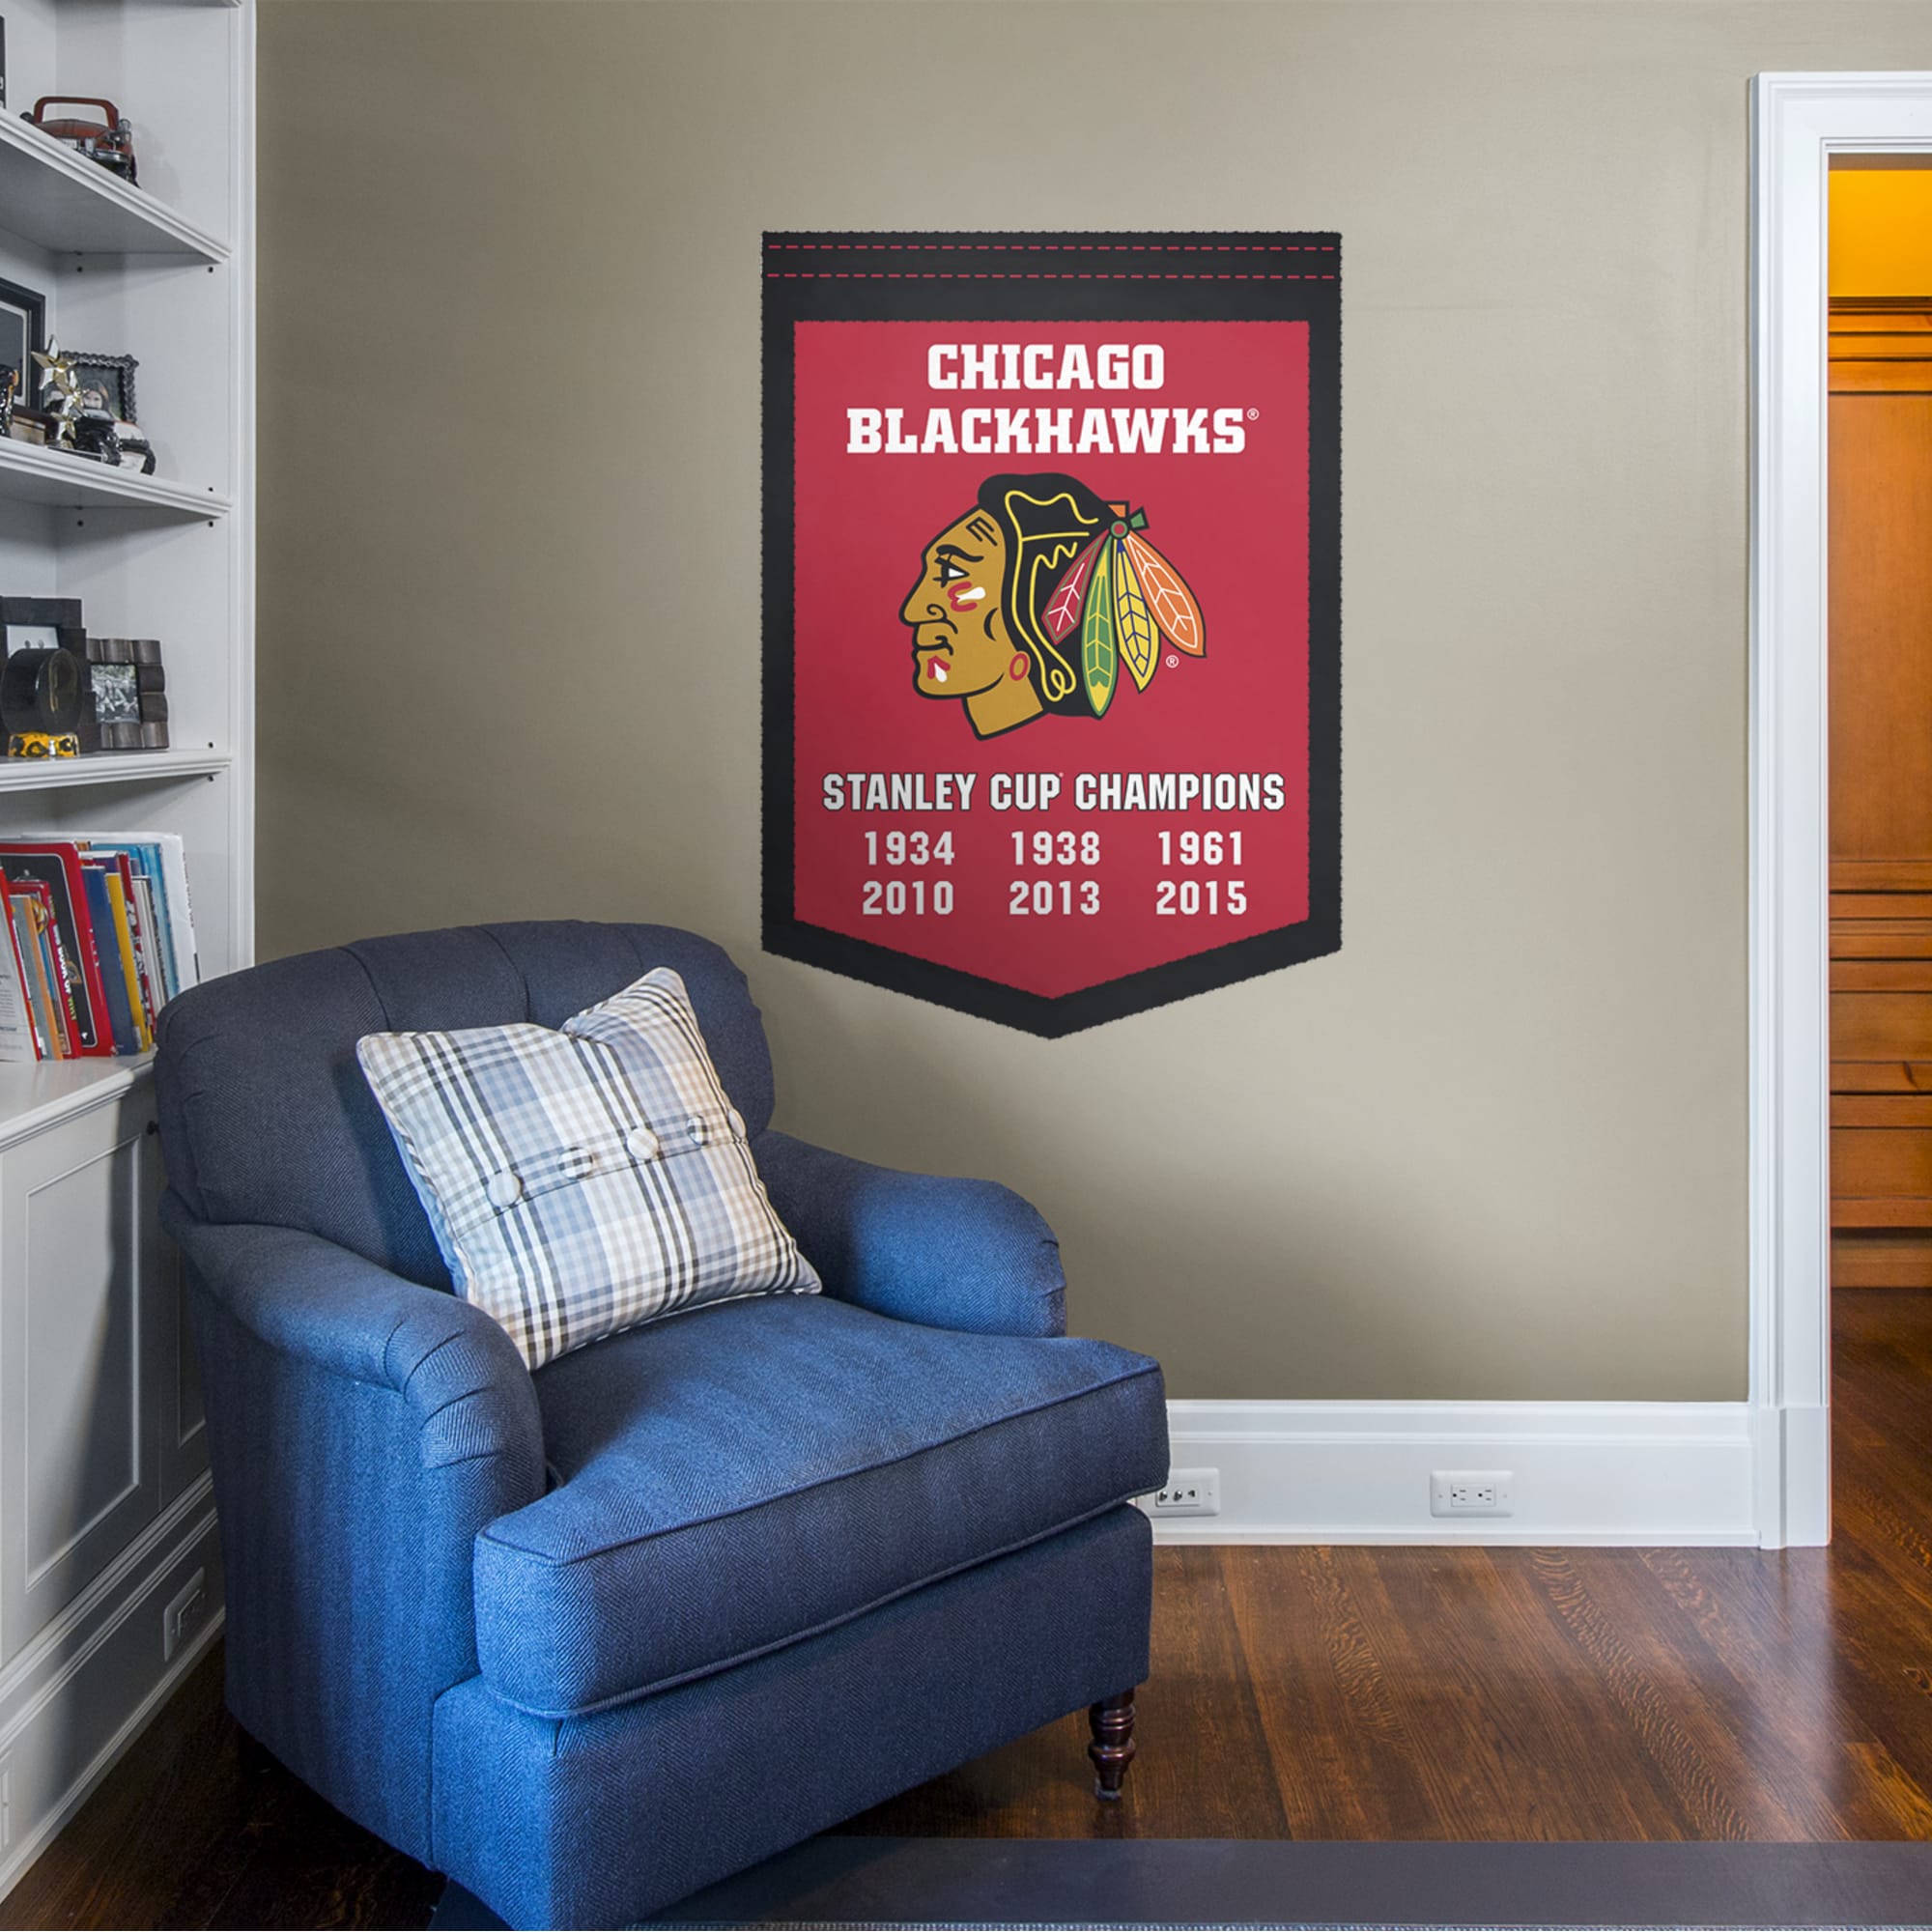 Chicago Blackhawks: Stanley Cup Champs Banner - Officially Licensed NHL Removable Wall Decal 34.0"W x 48.0"H by Fathead | Vinyl